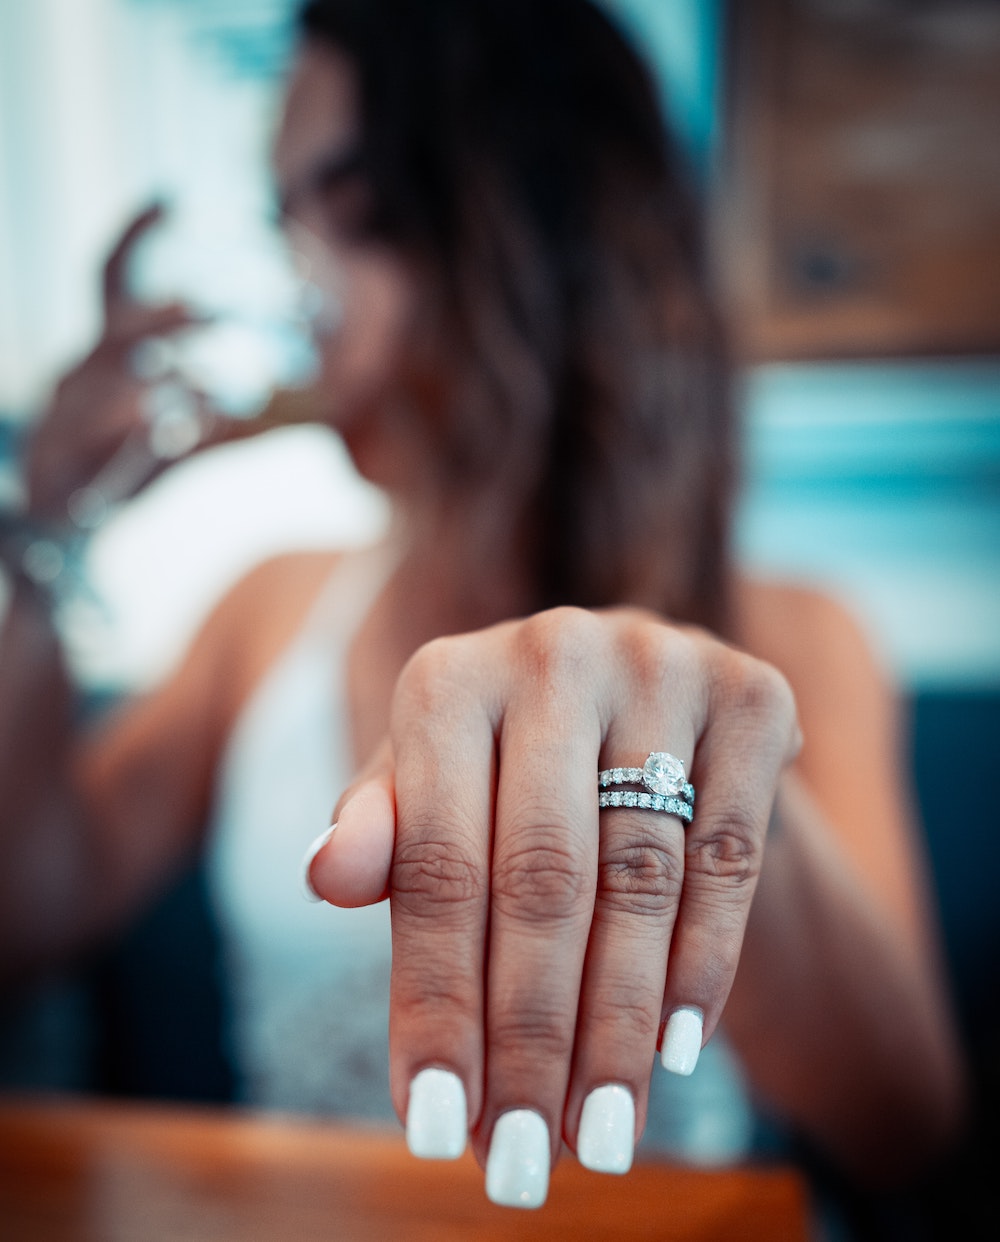 Early marriage may lead to unsafe drinking behavior by those with higher genetic risk of alcohol use